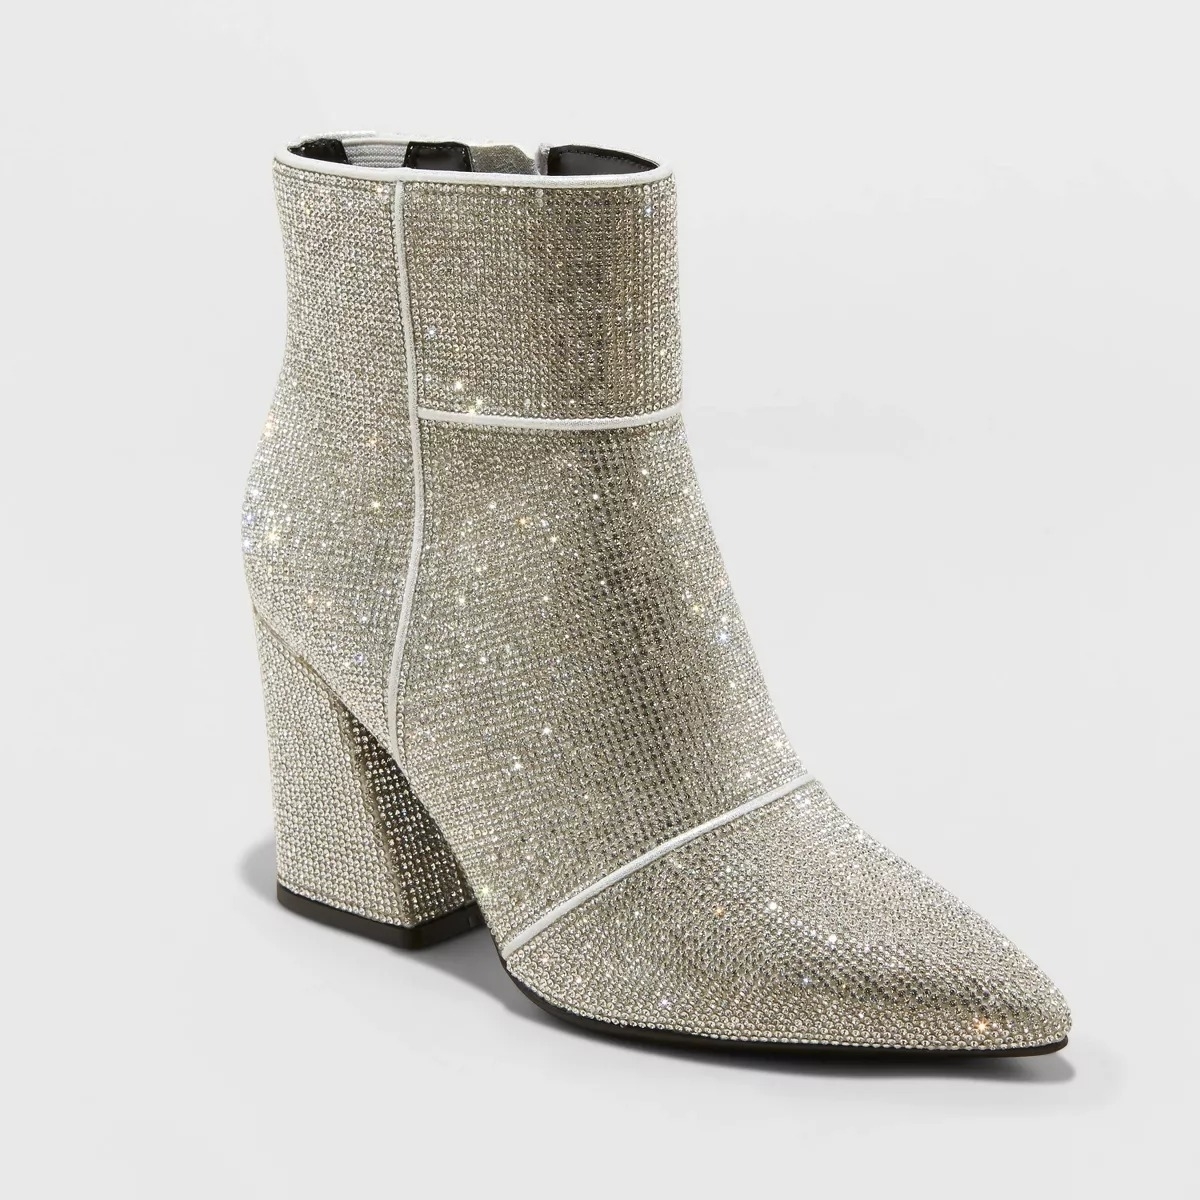 sparkly ankle boots with a pointed toe